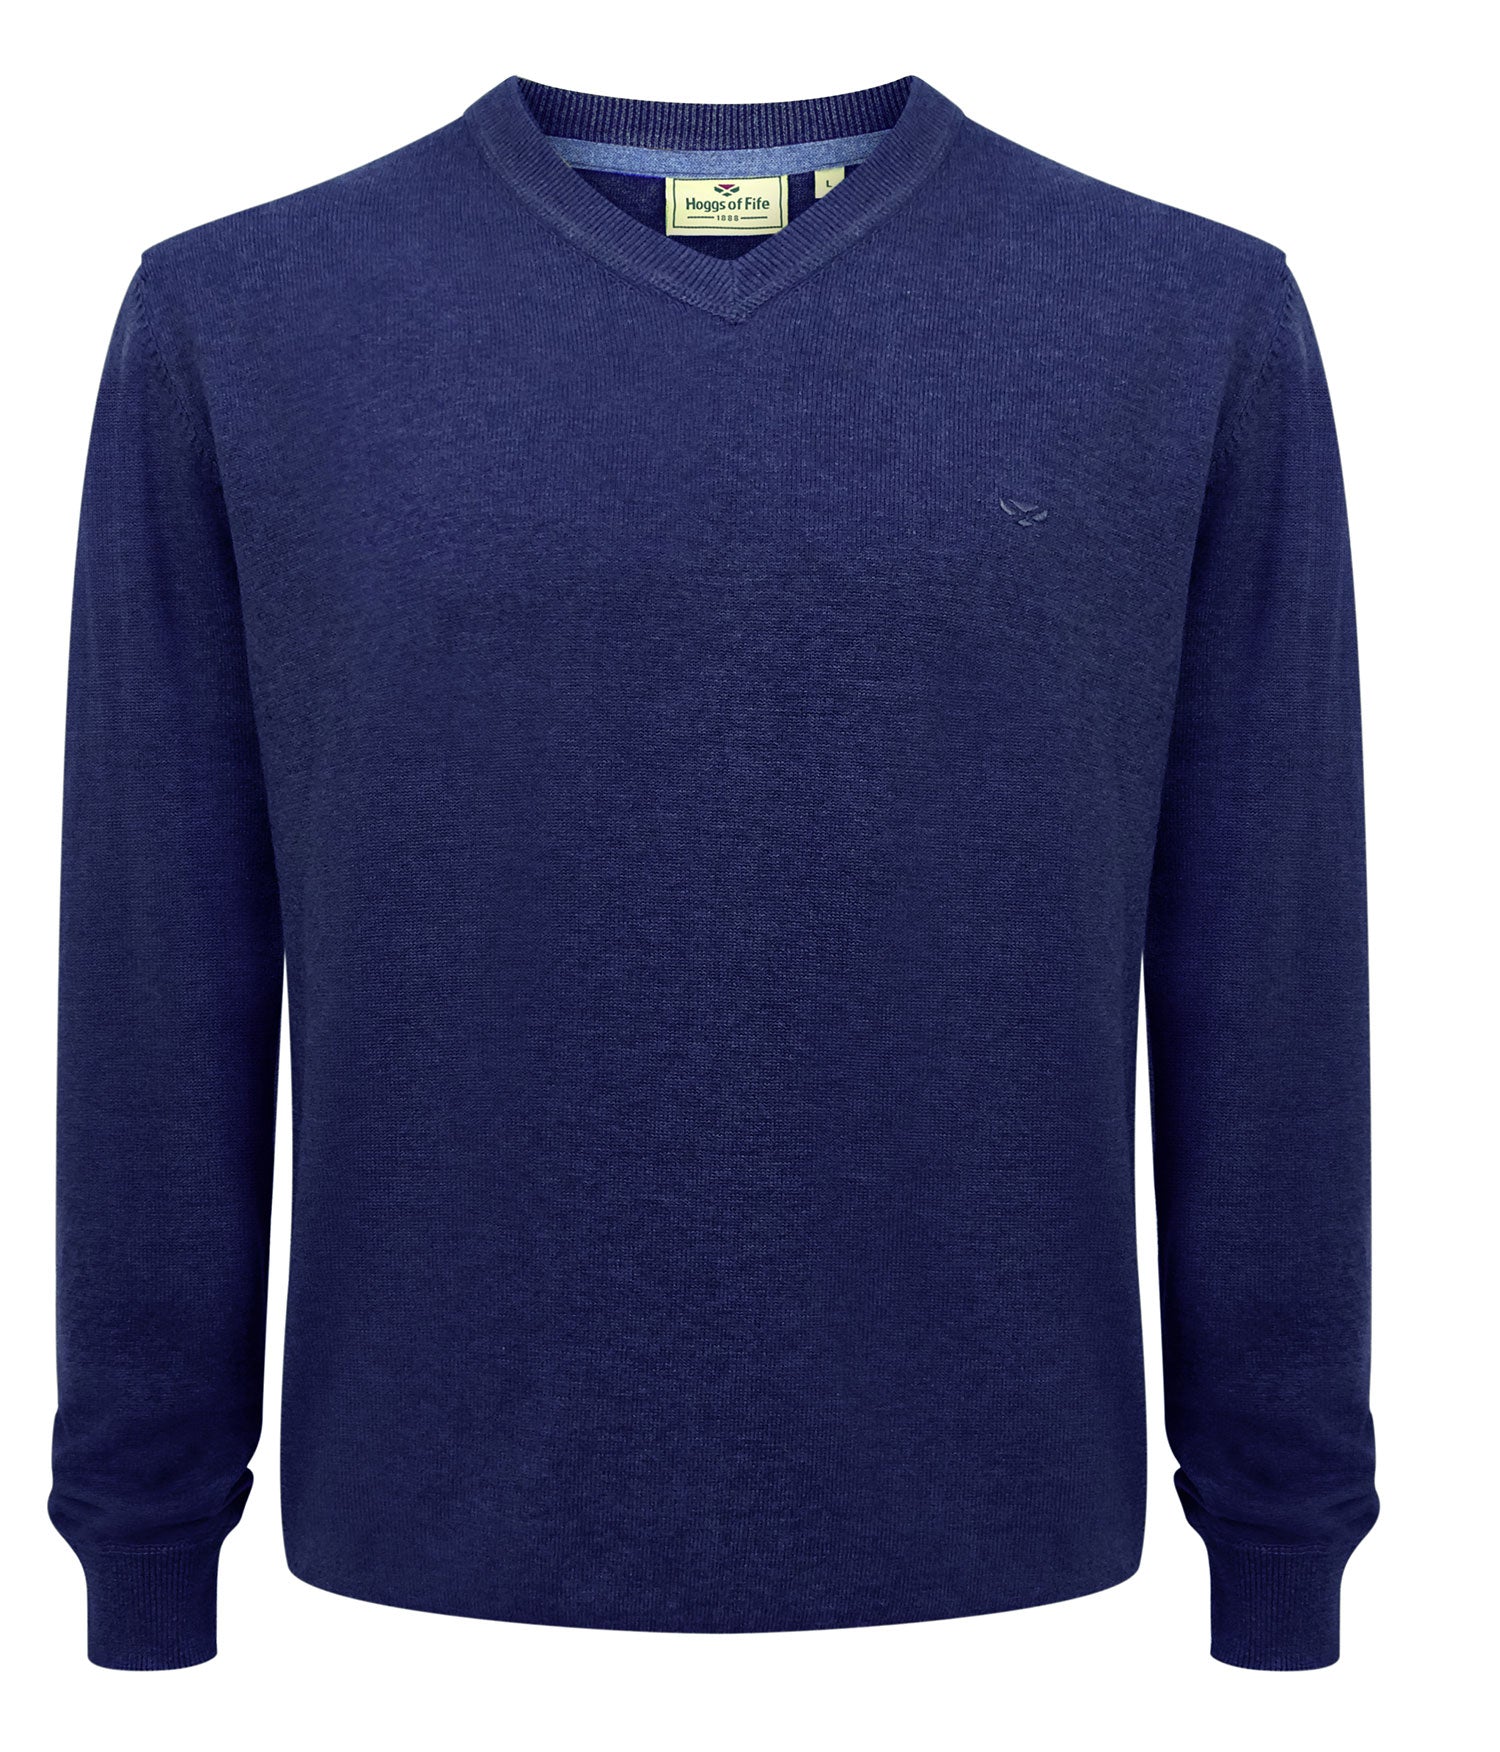 Navy Denim Stirling V Neck Cotton Sweater by Hoggs of Fife 